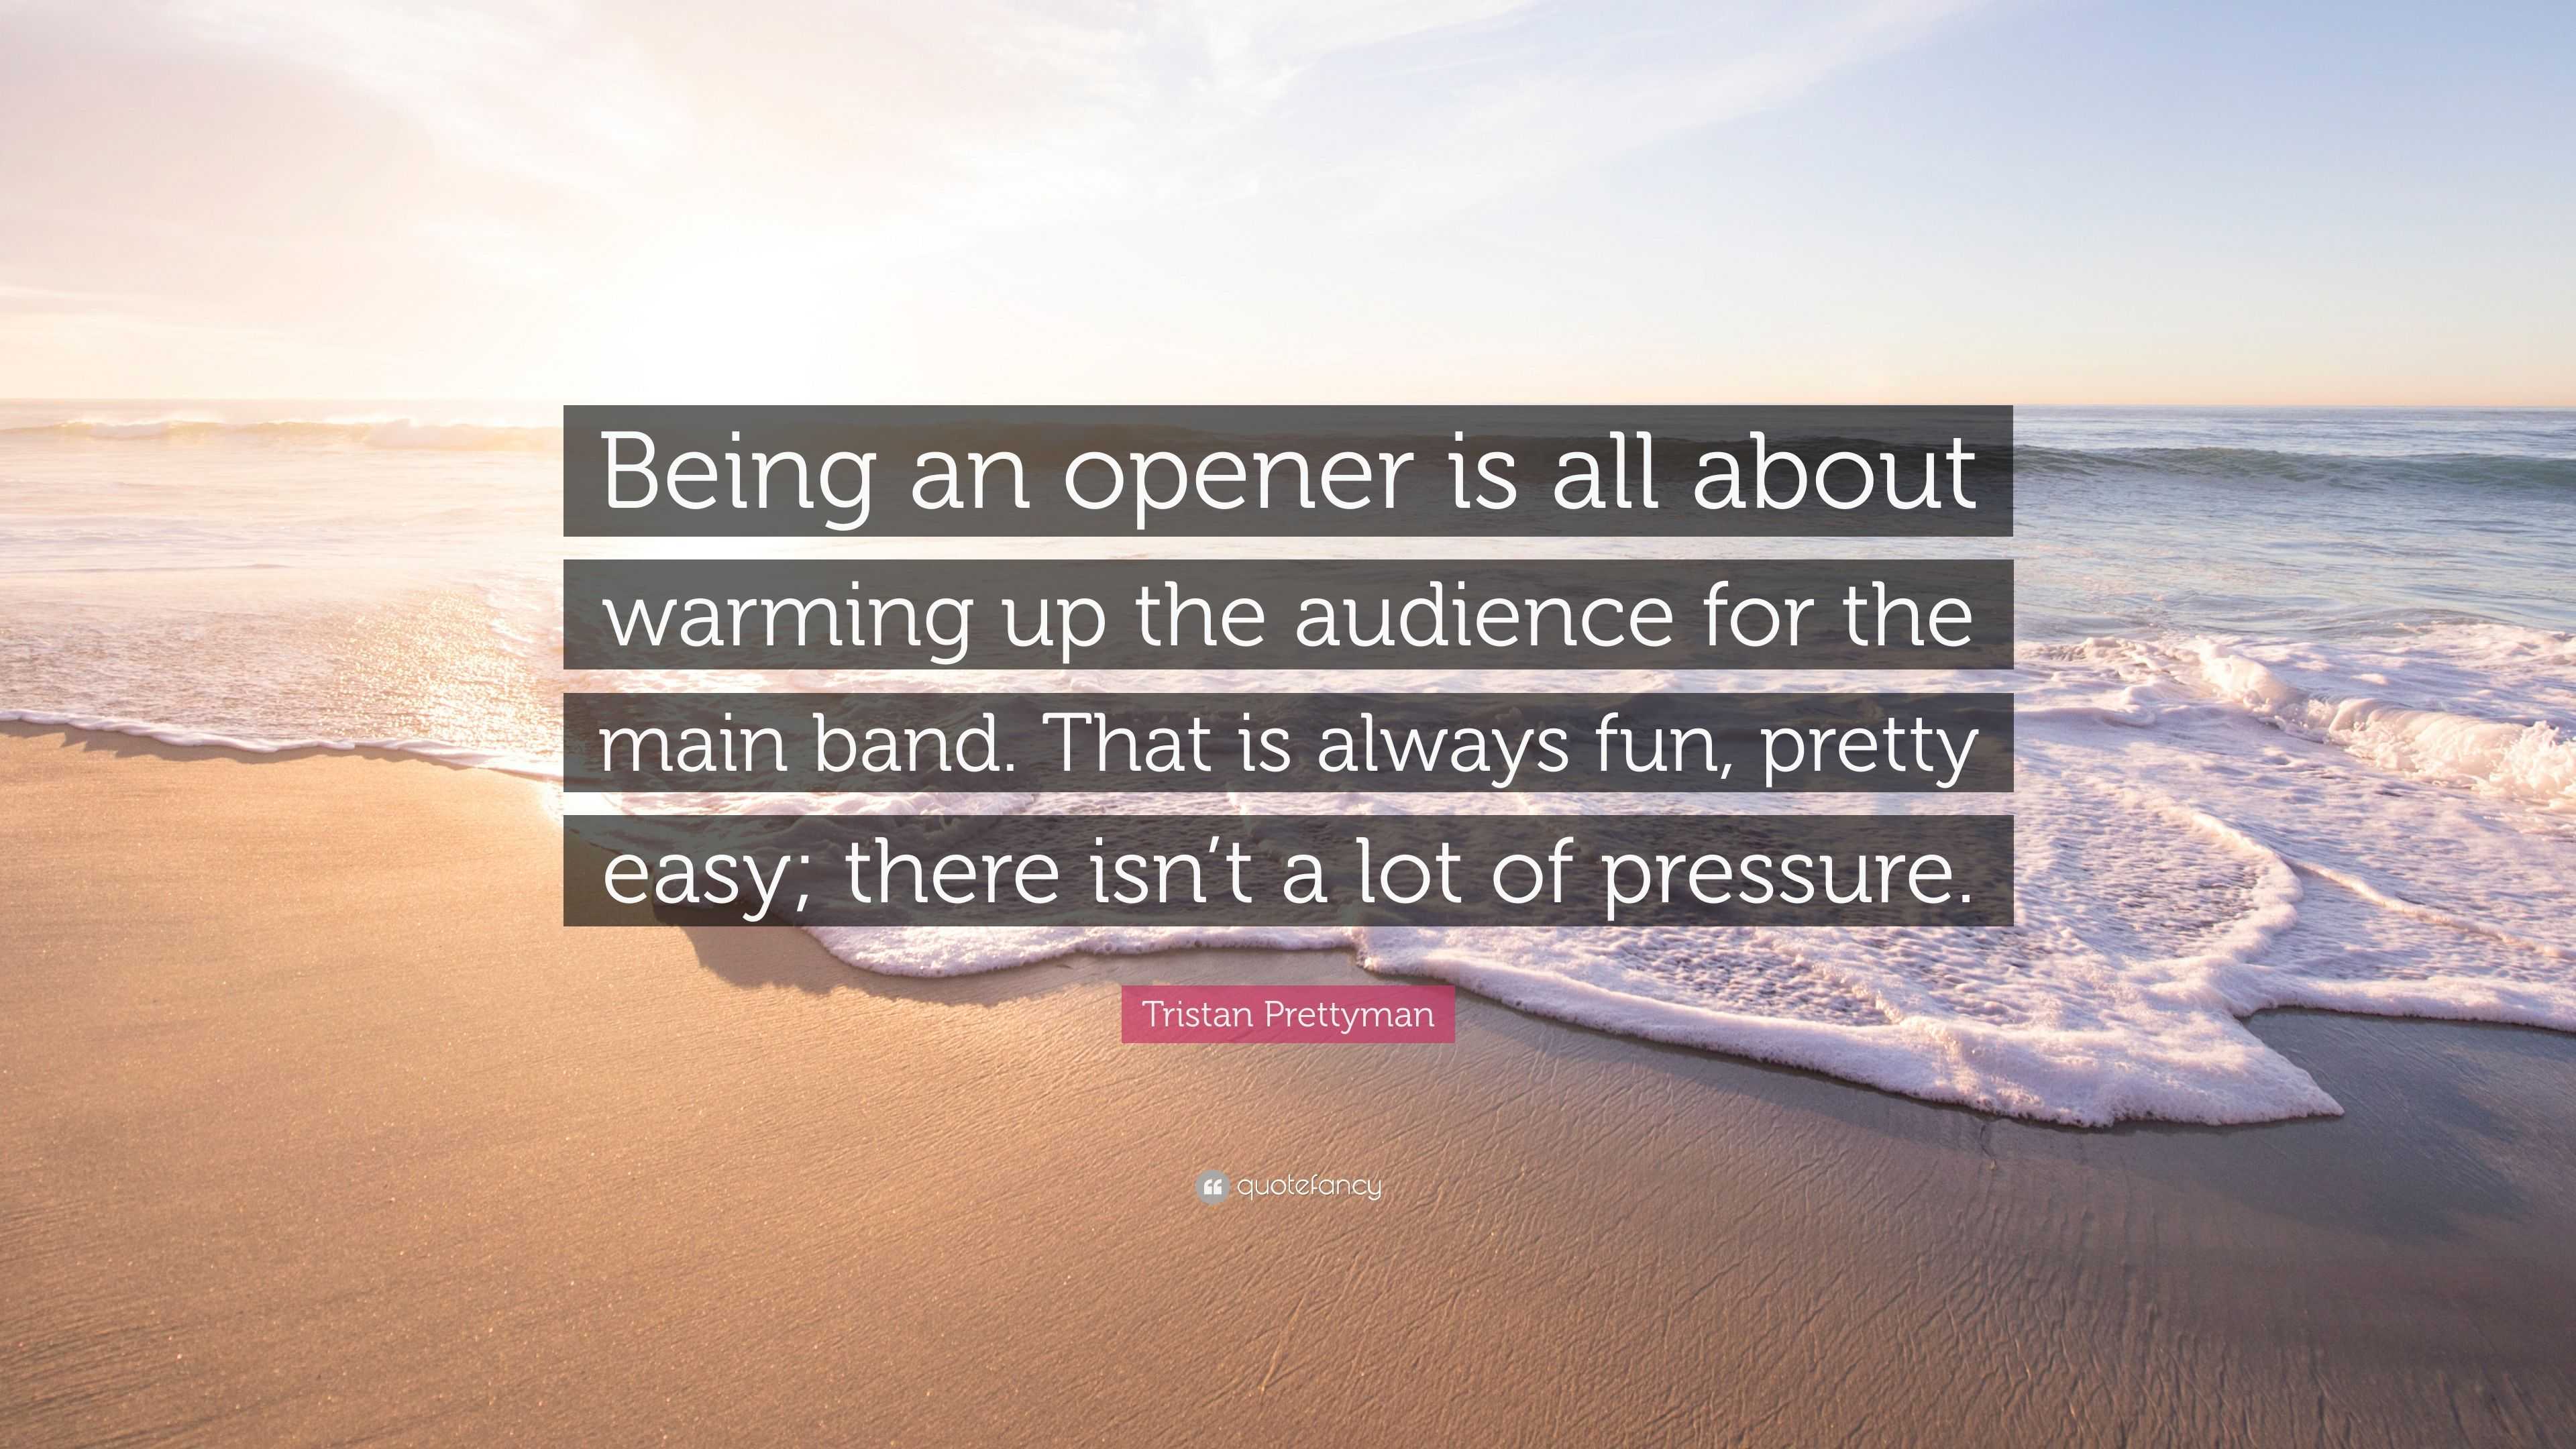 https://quotefancy.com/media/wallpaper/3840x2160/3061502-Tristan-Prettyman-Quote-Being-an-opener-is-all-about-warming-up.jpg